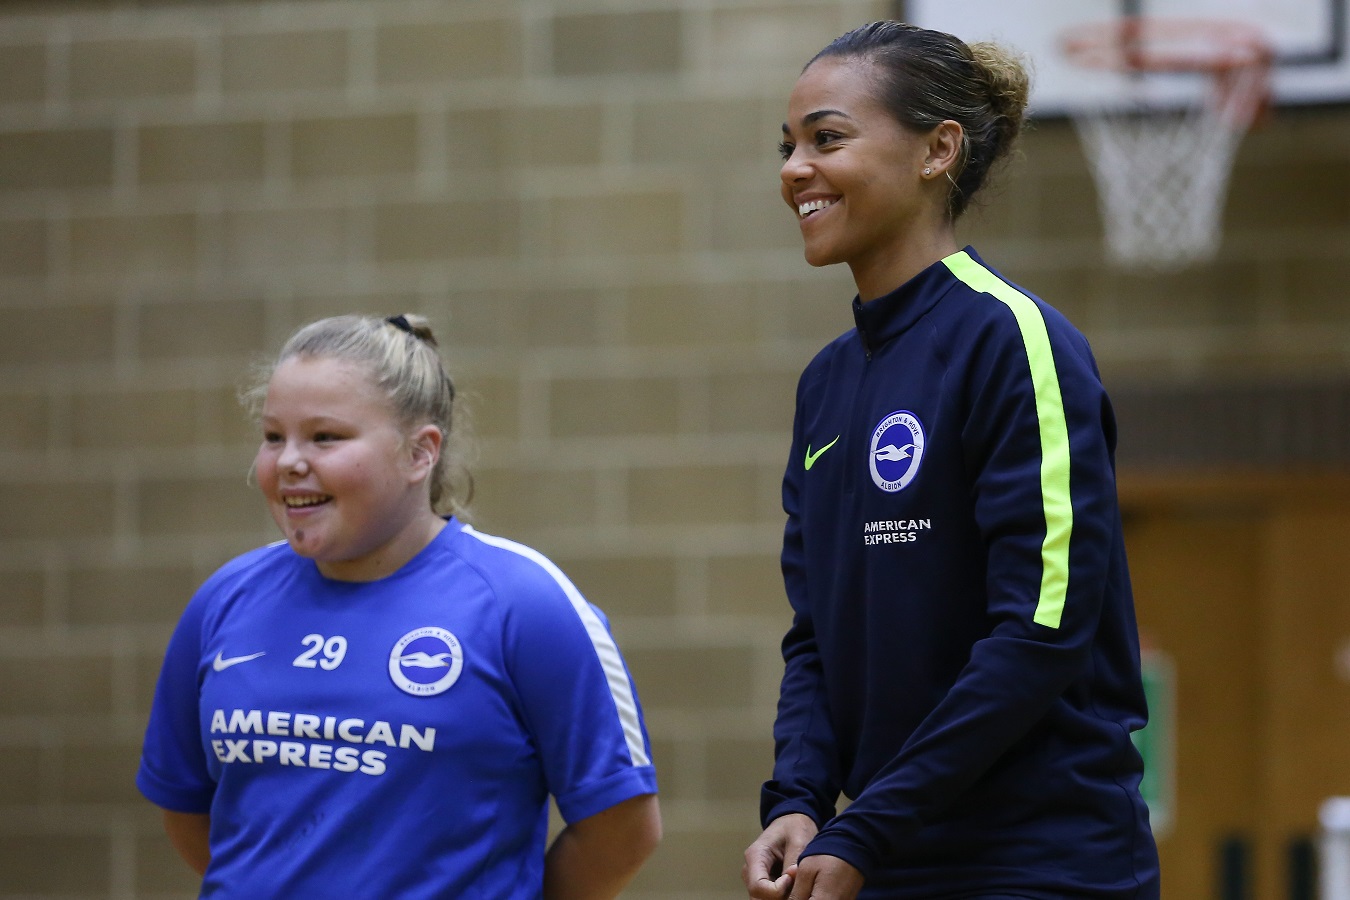 Albion in the Community aiming to increase participation among women and girls